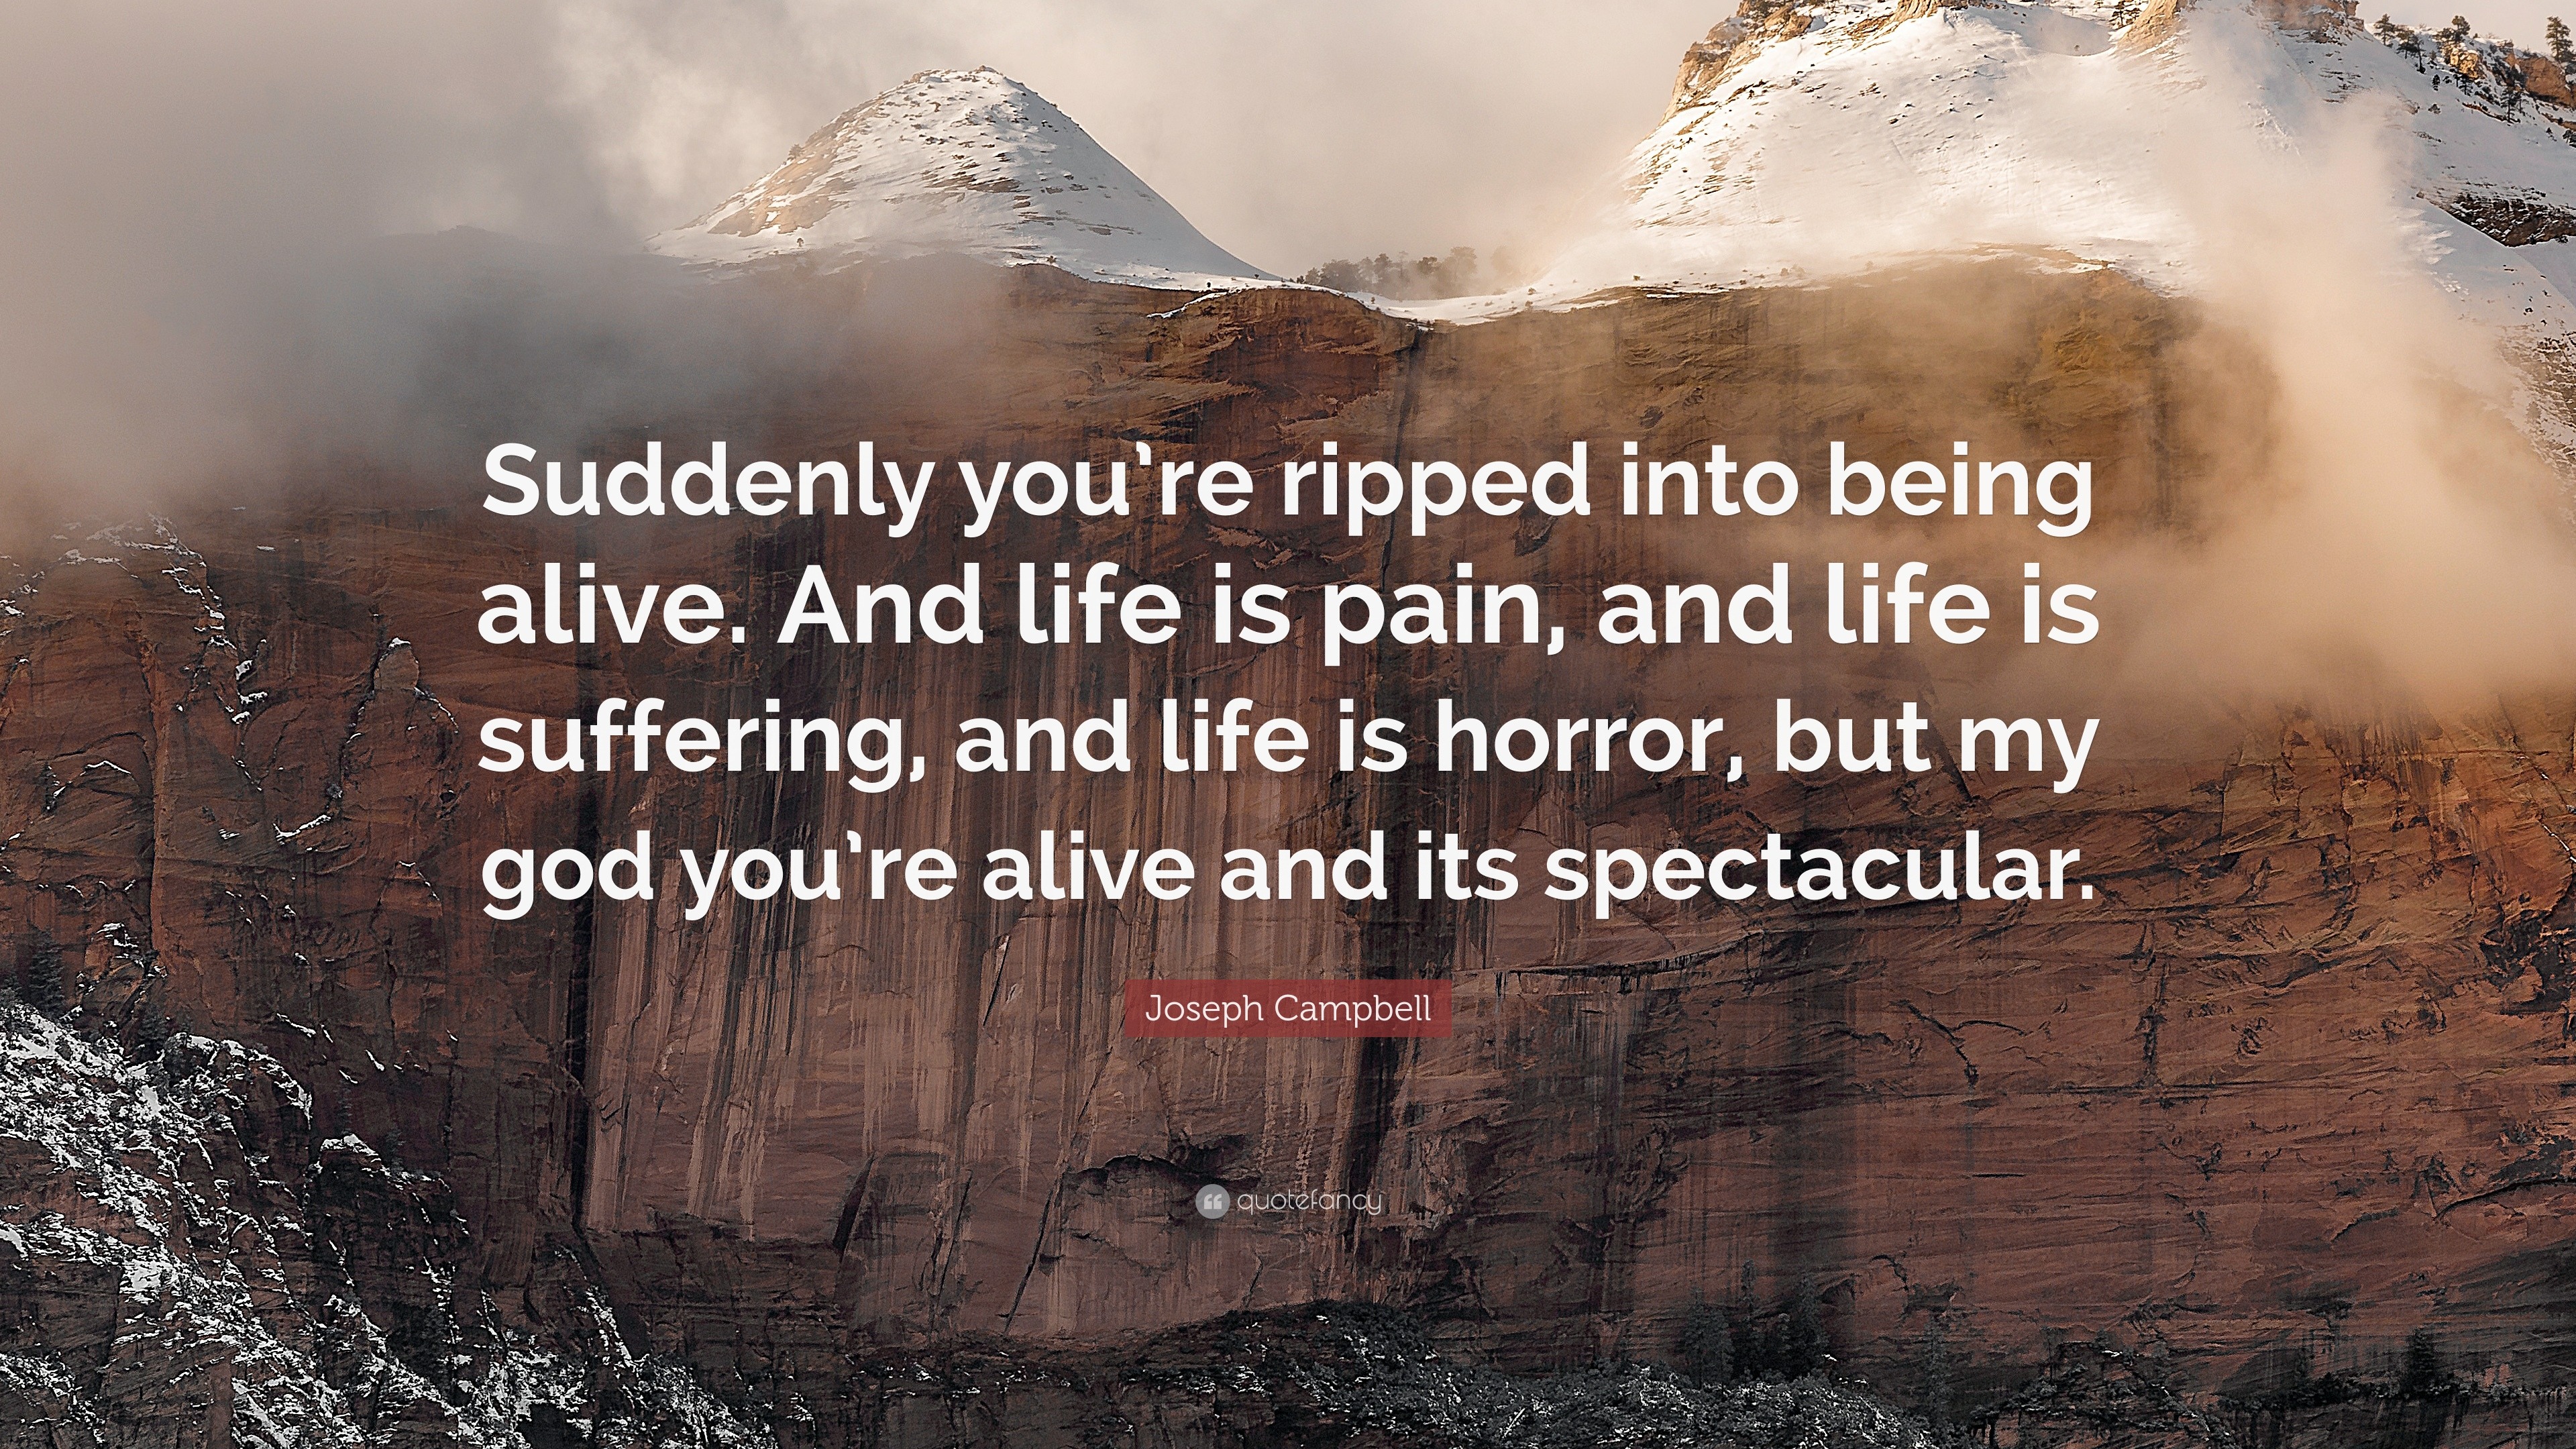 Joseph Campbell Quote “Suddenly you’re ripped into being alive. And